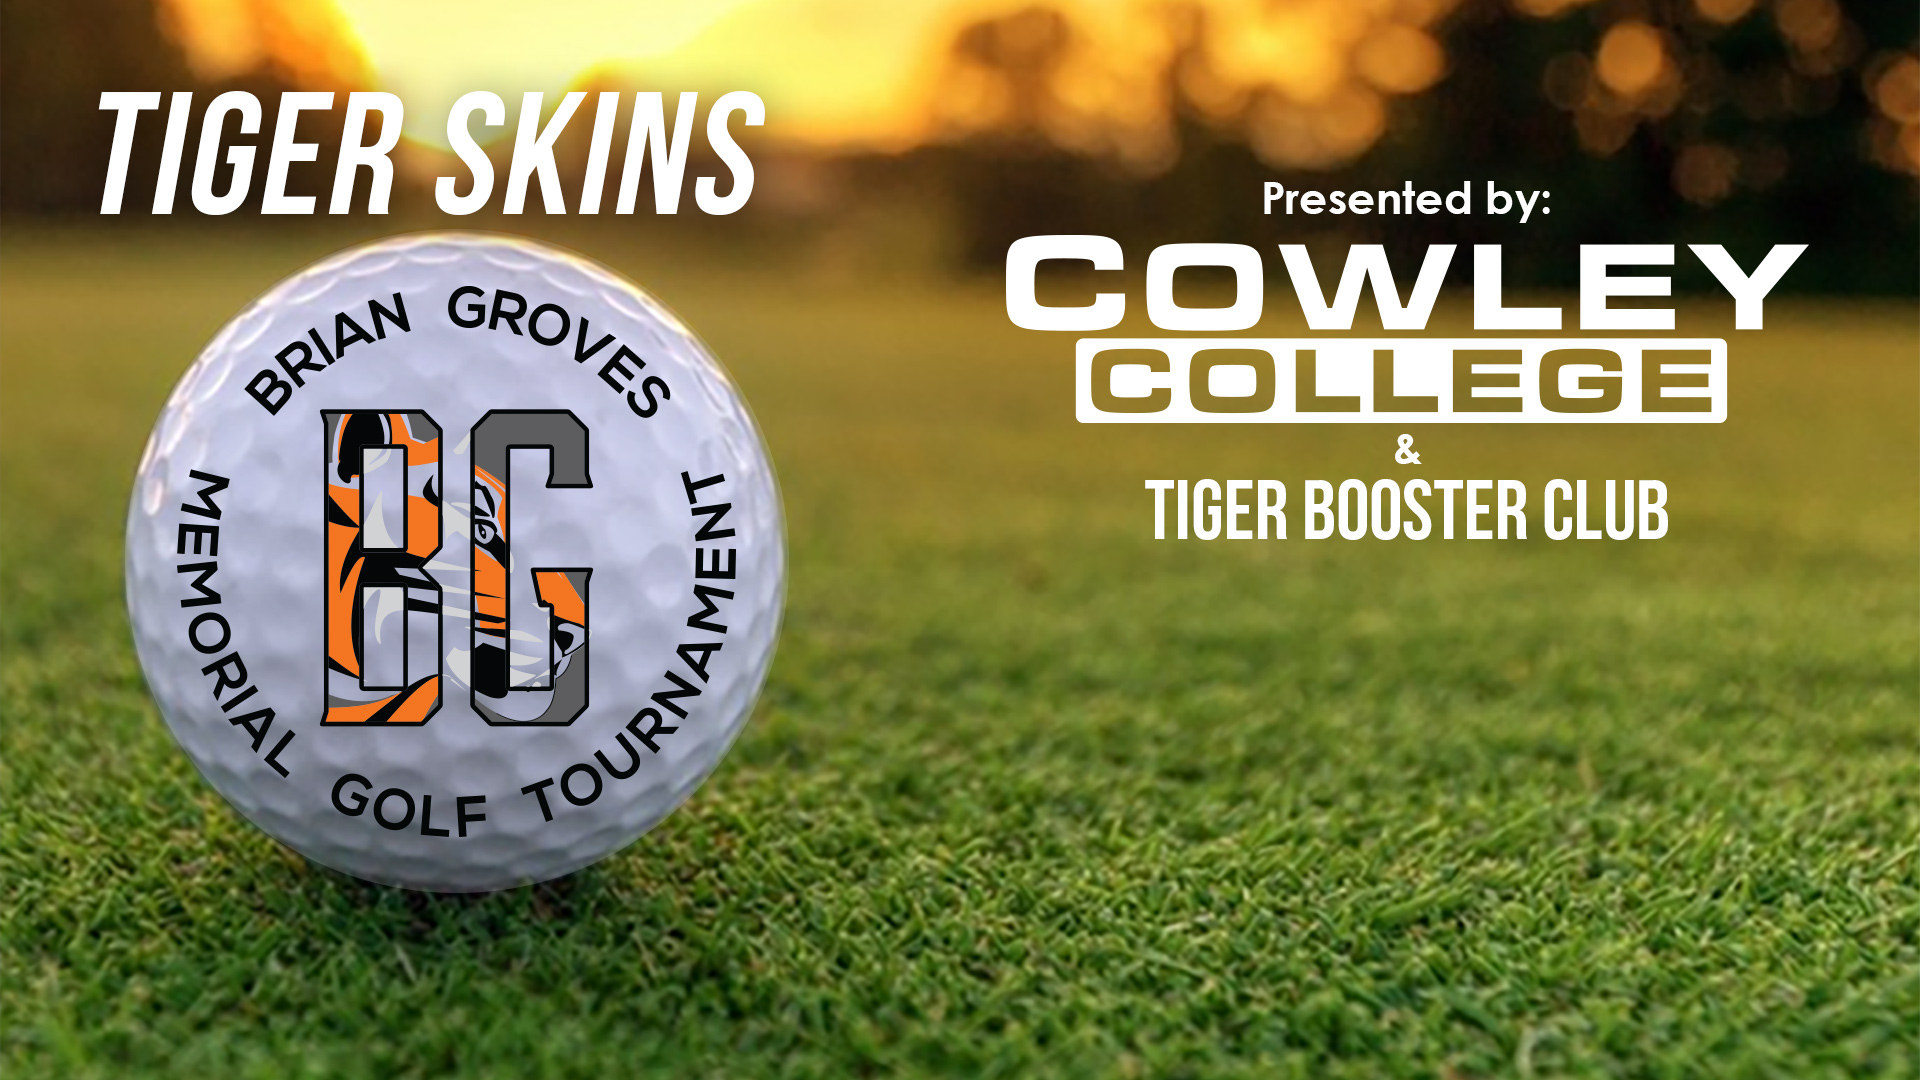 27th annual Tiger Skins/Brian Groves Golf Tourney raises money for scholarships